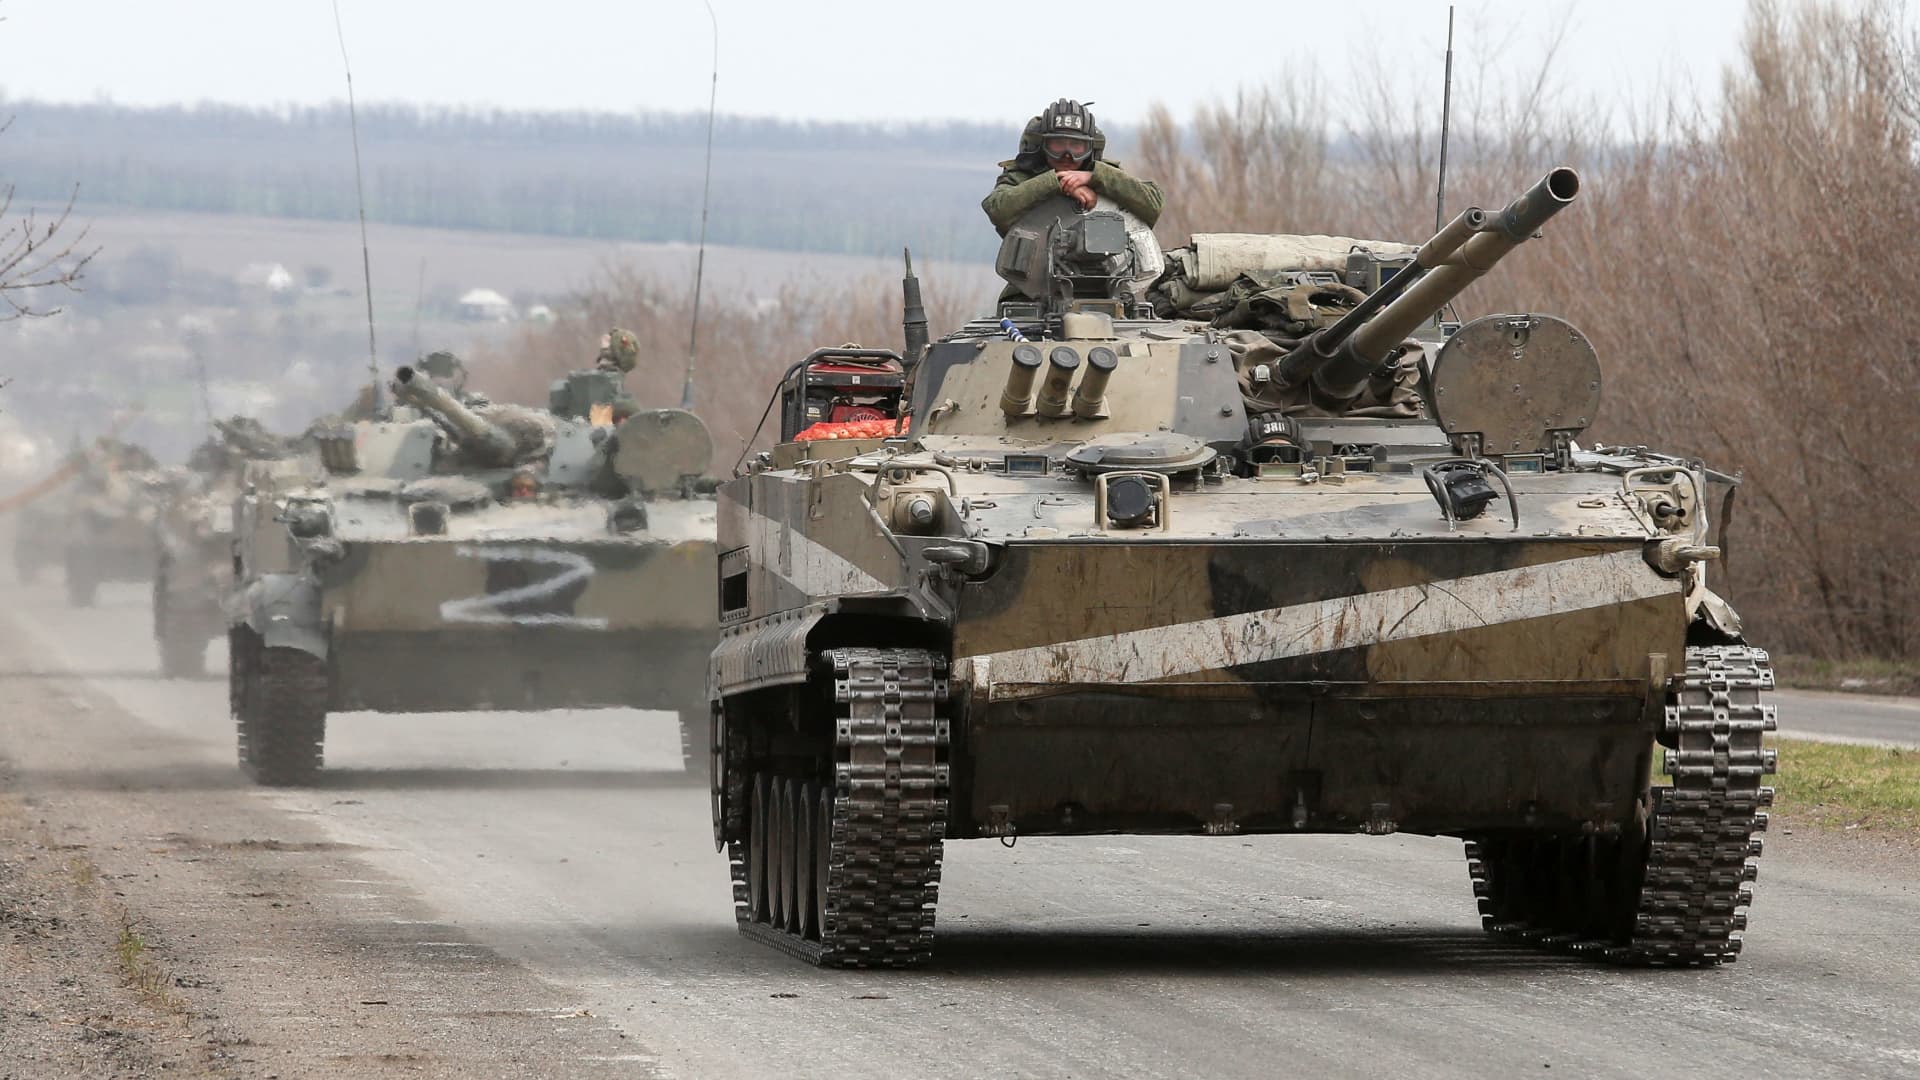 Service members of pro-Russian troops drive armoured vehicles during Ukraine-Russia conflict on a road outside the southern port city of Mariupol, Ukraine April 10, 2022.